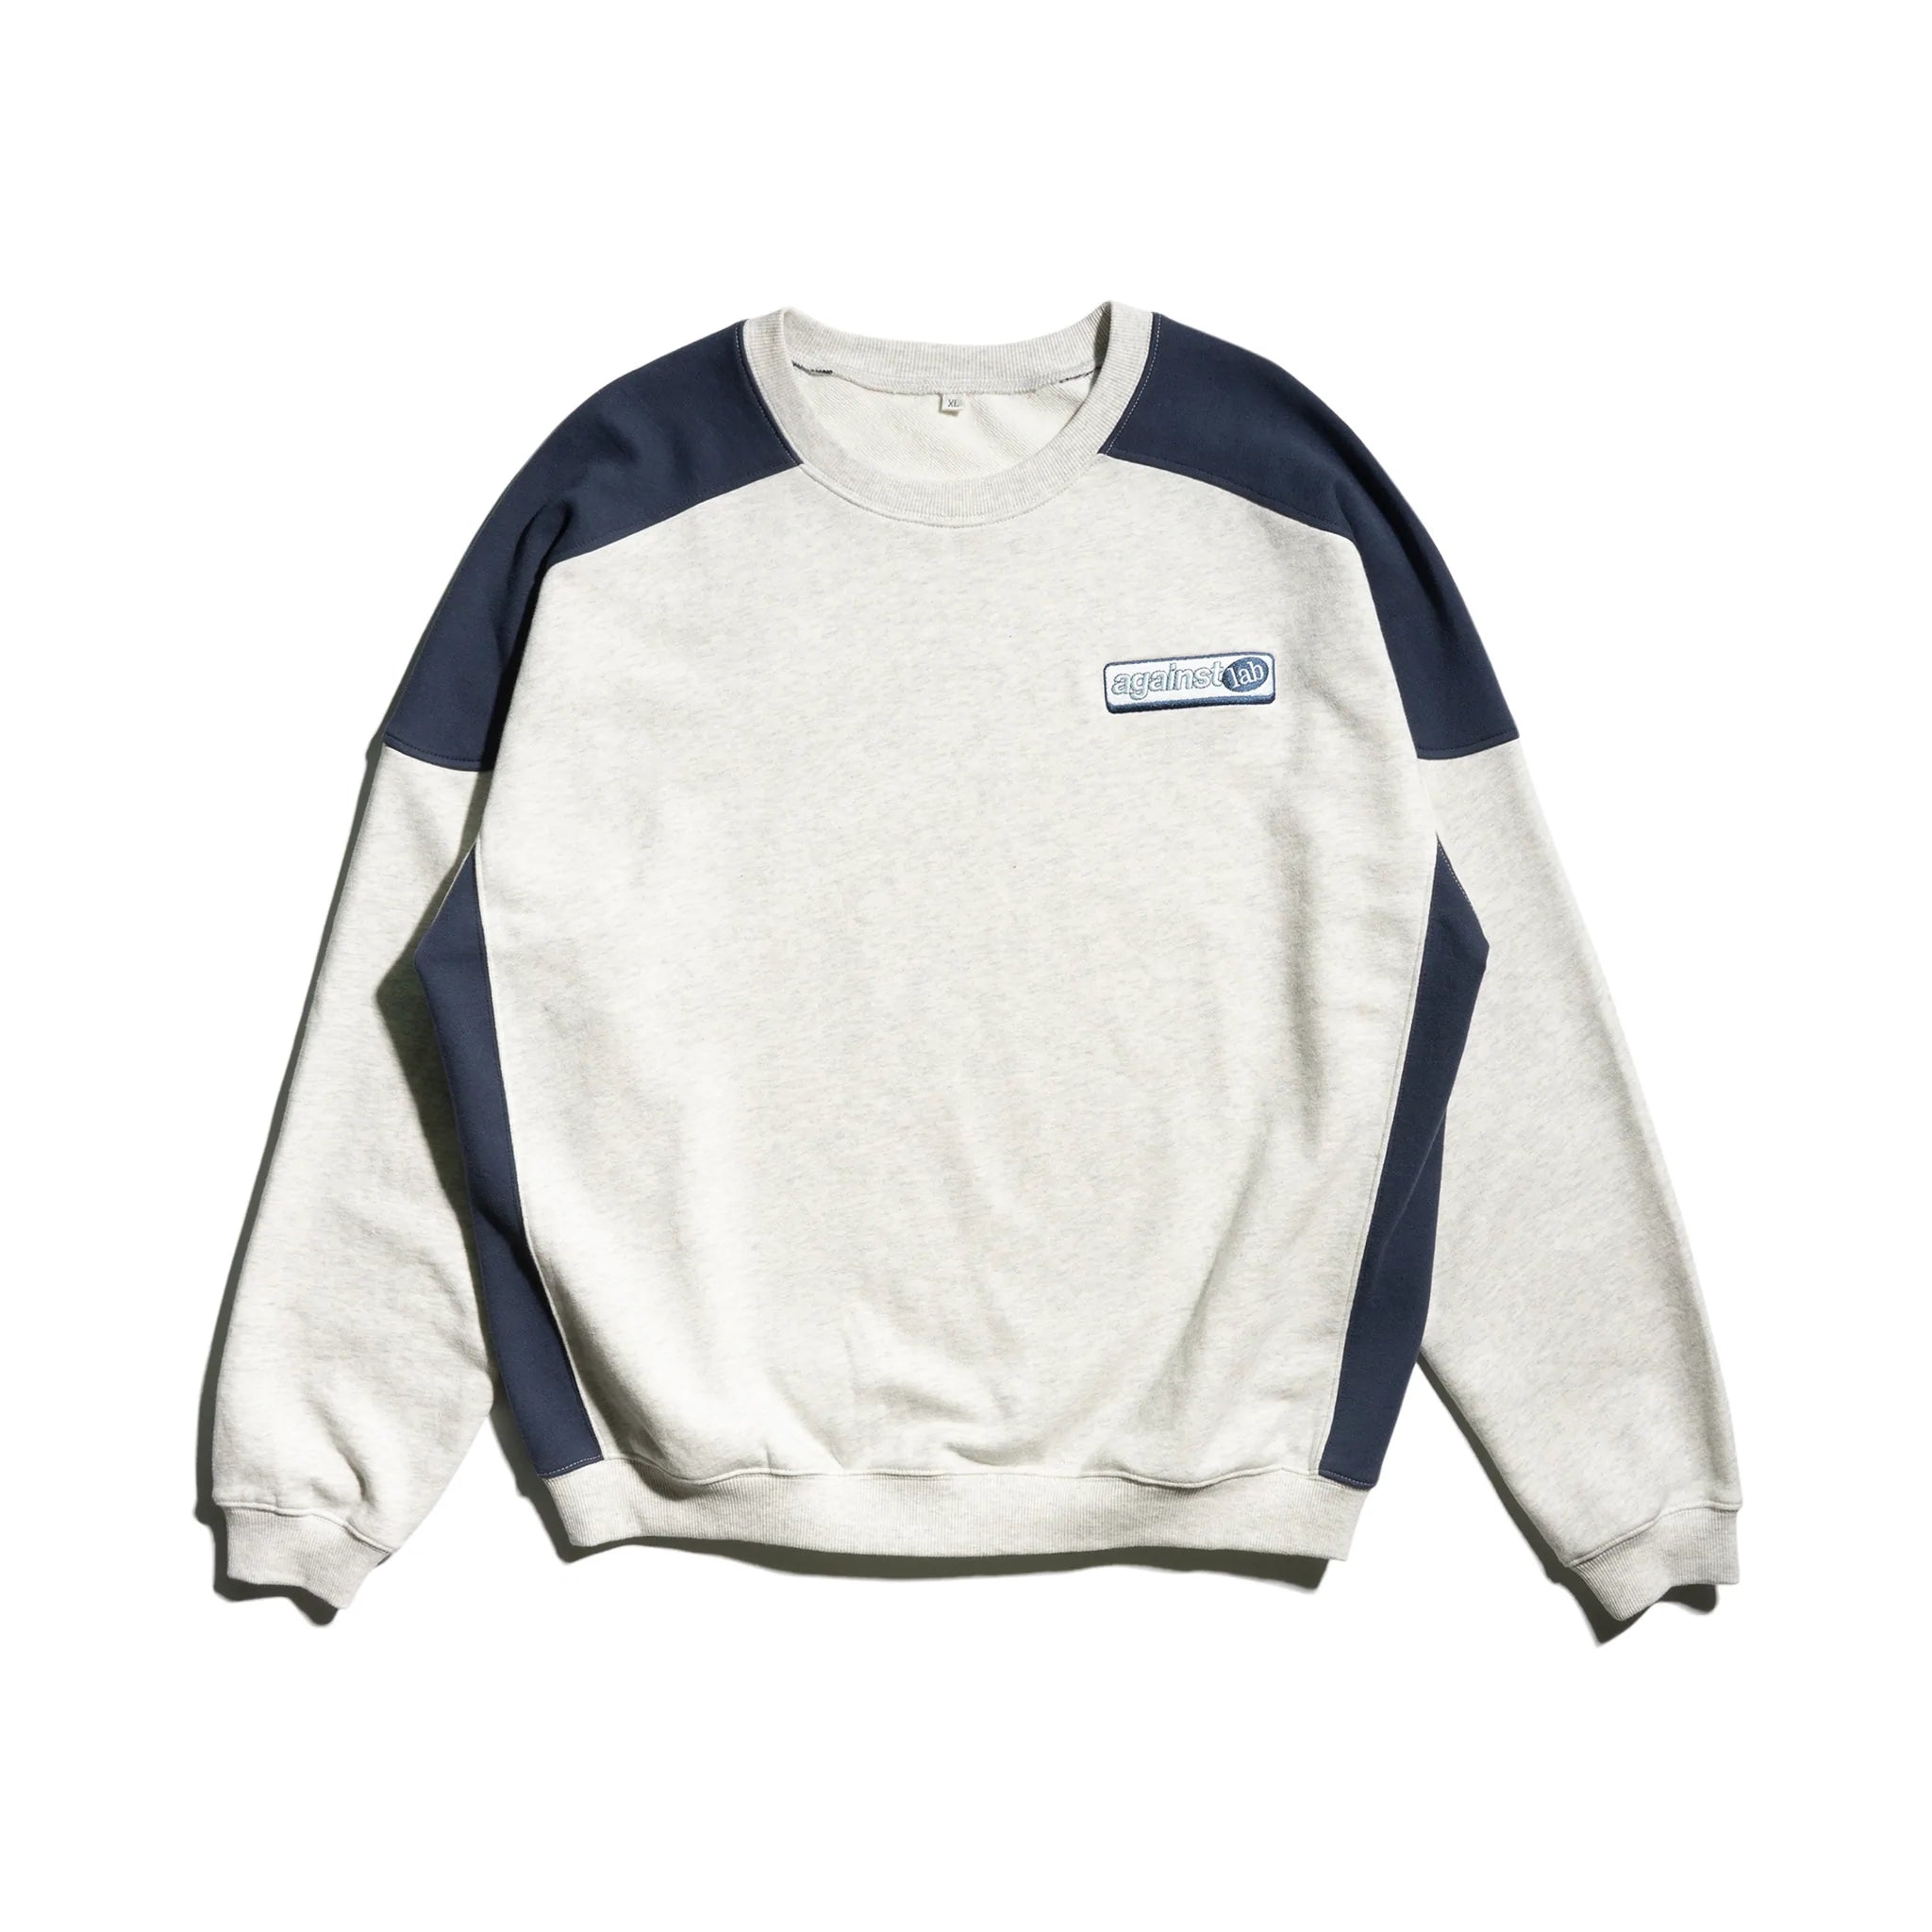 Against Lab | Two-Tone Panel Sweater Grey